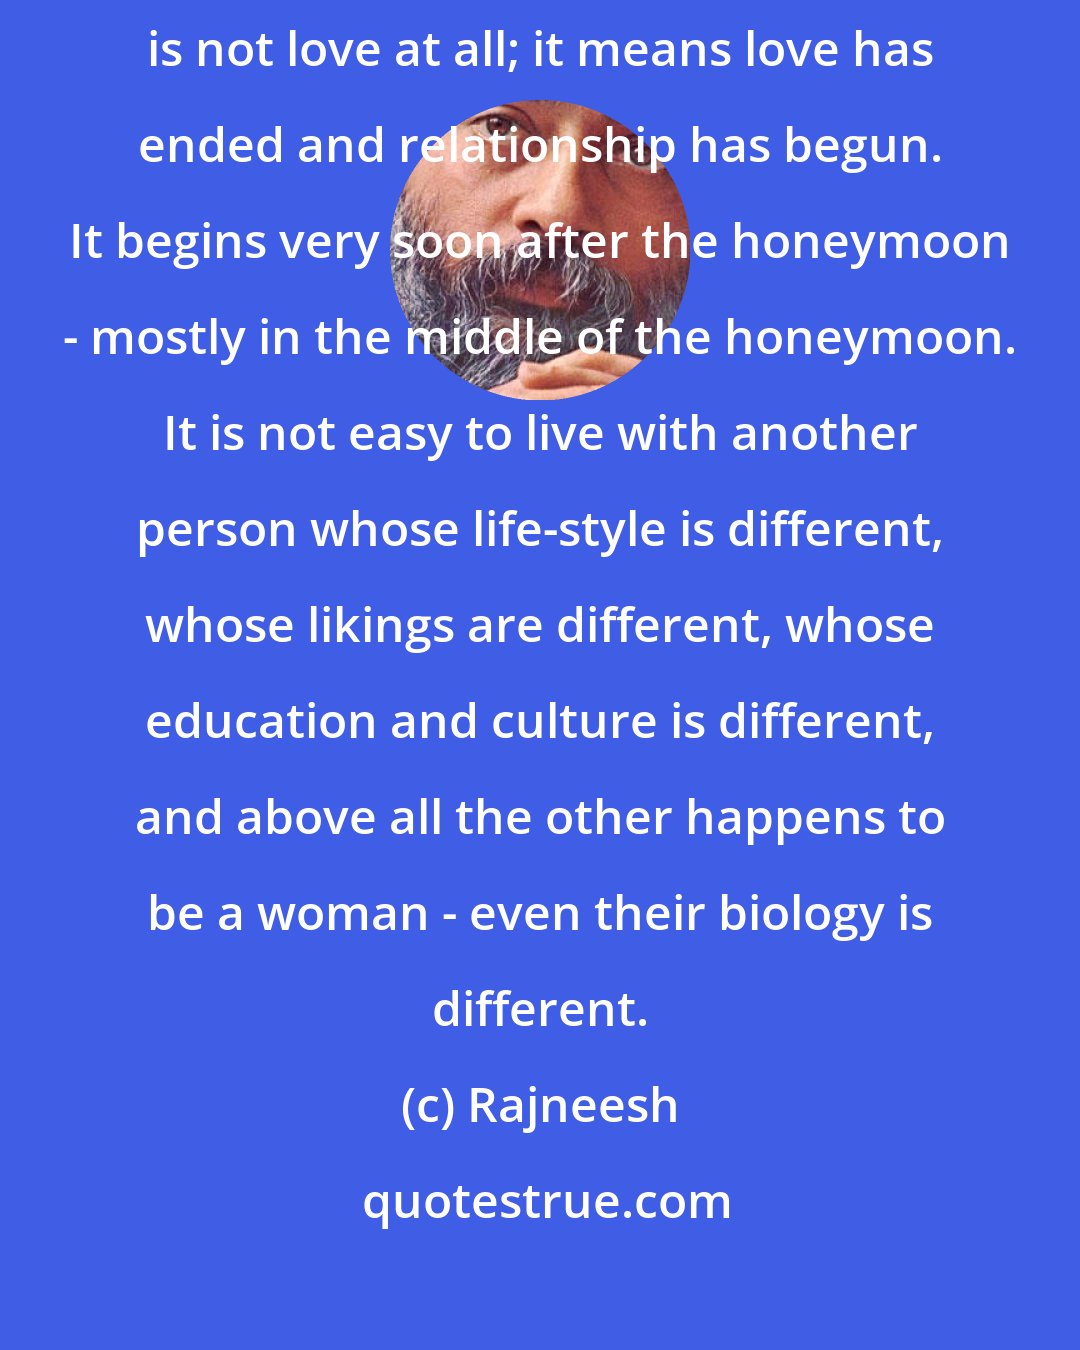 Rajneesh: The question of surrender is political, it is not a question of love. And relationship is not love at all; it means love has ended and relationship has begun. It begins very soon after the honeymoon - mostly in the middle of the honeymoon. It is not easy to live with another person whose life-style is different, whose likings are different, whose education and culture is different, and above all the other happens to be a woman - even their biology is different.